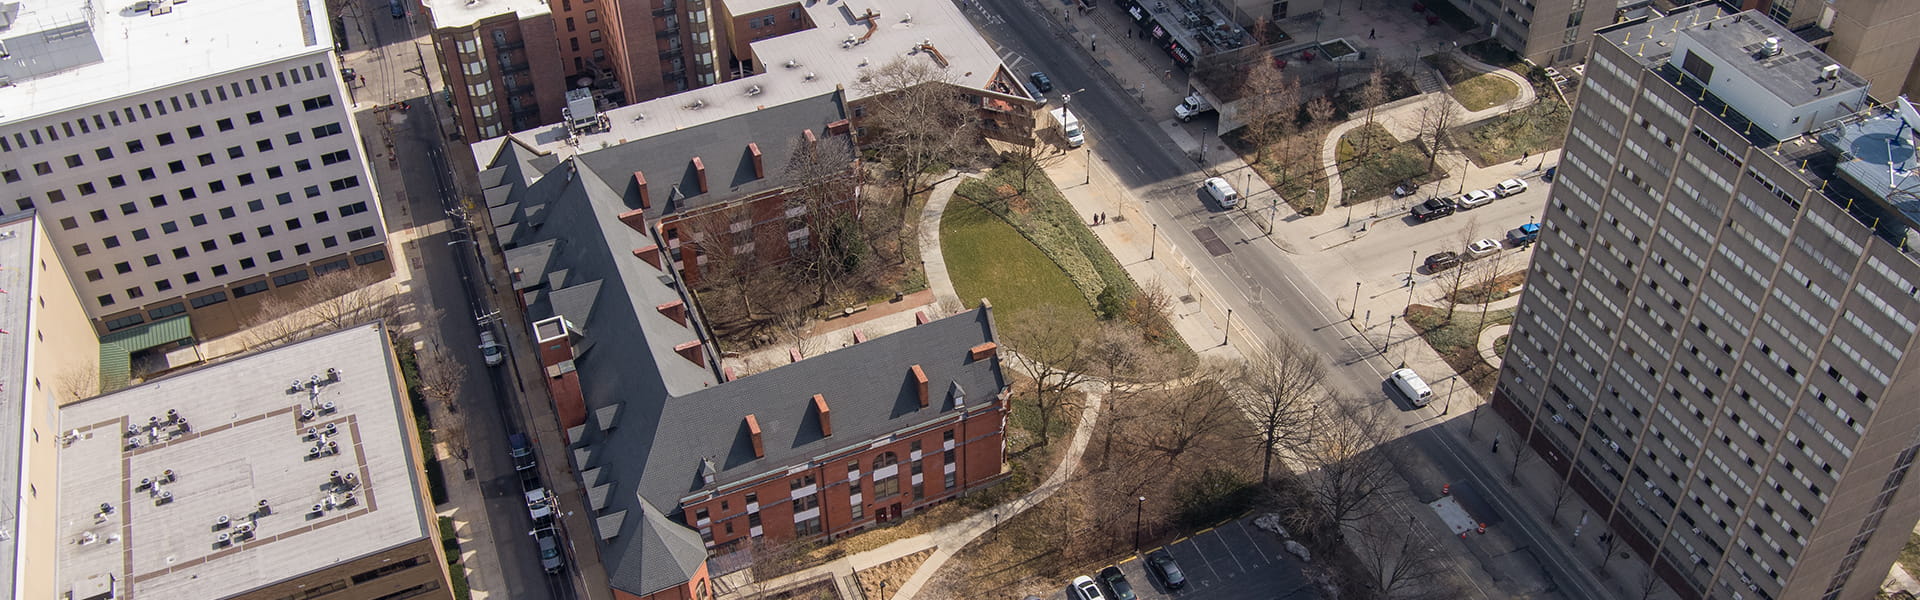 Aerial photo of The Ralston Center's 133-year historic building in the center of the University of Pennsylvania